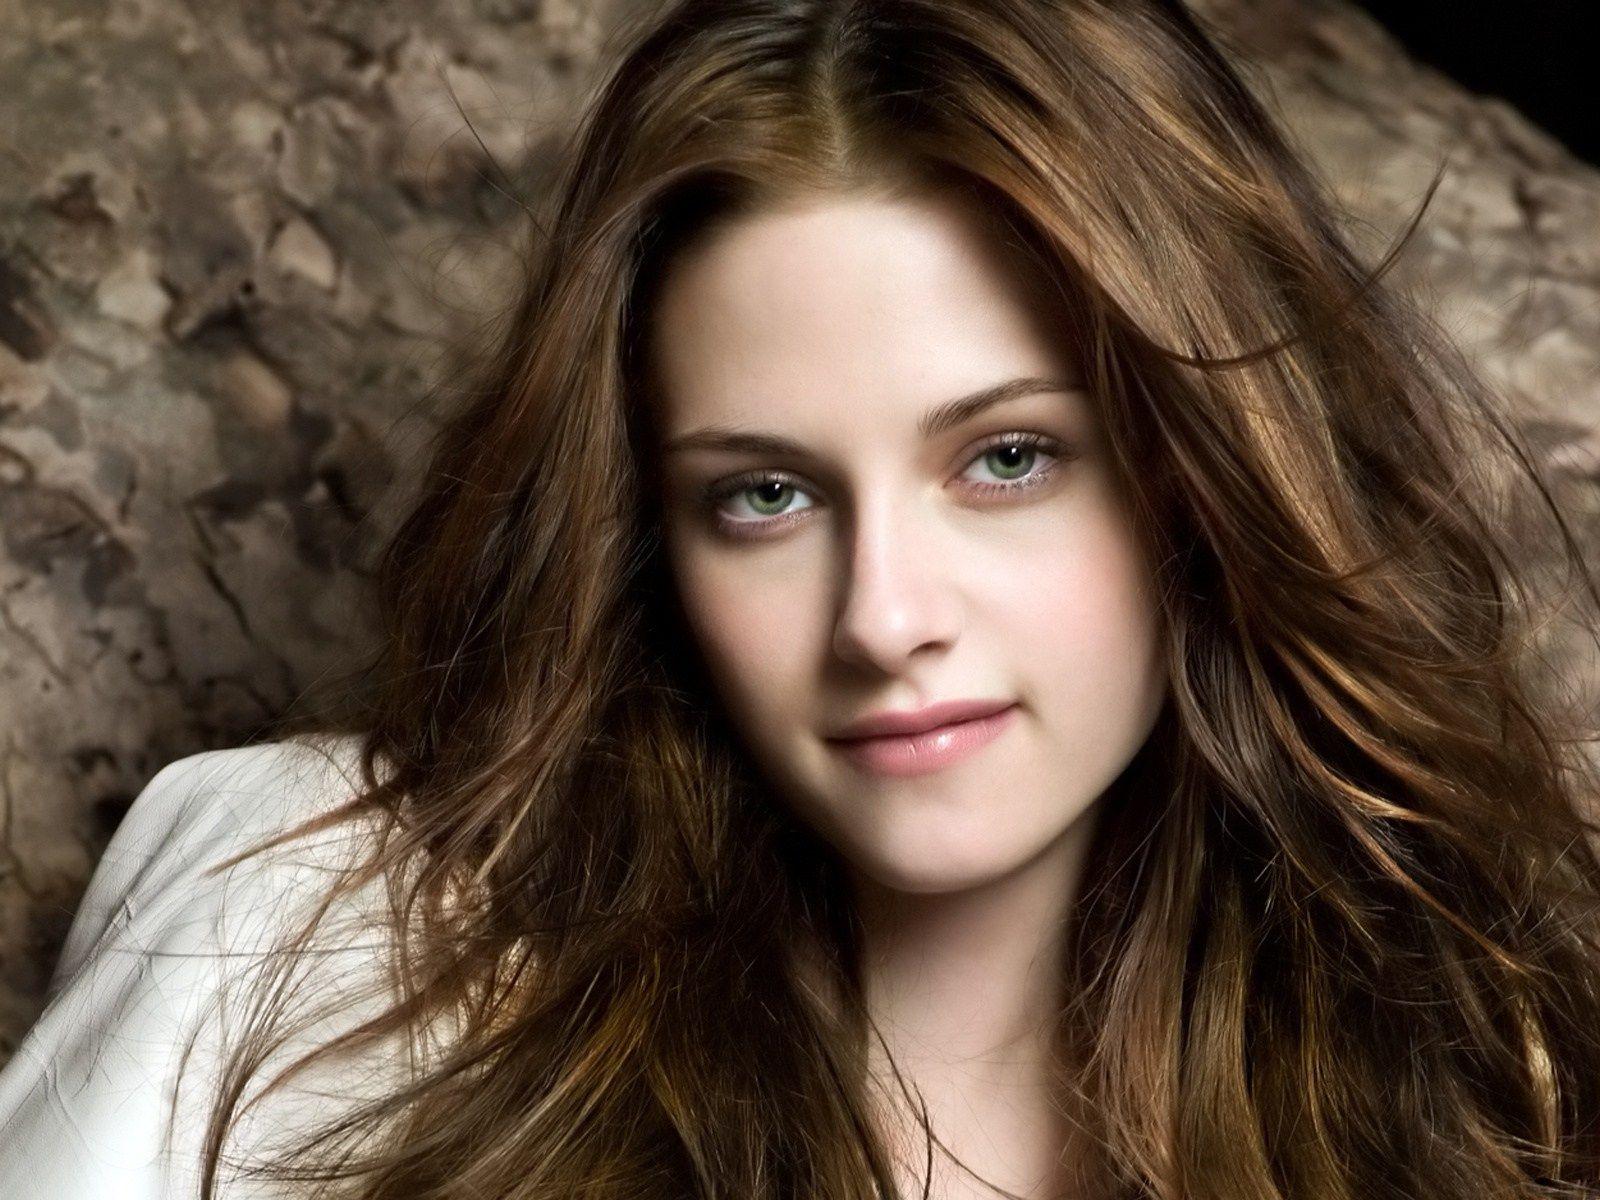 Top 12 Pretty Image Pictures Of Kristen Stewart WithOut Make Up.